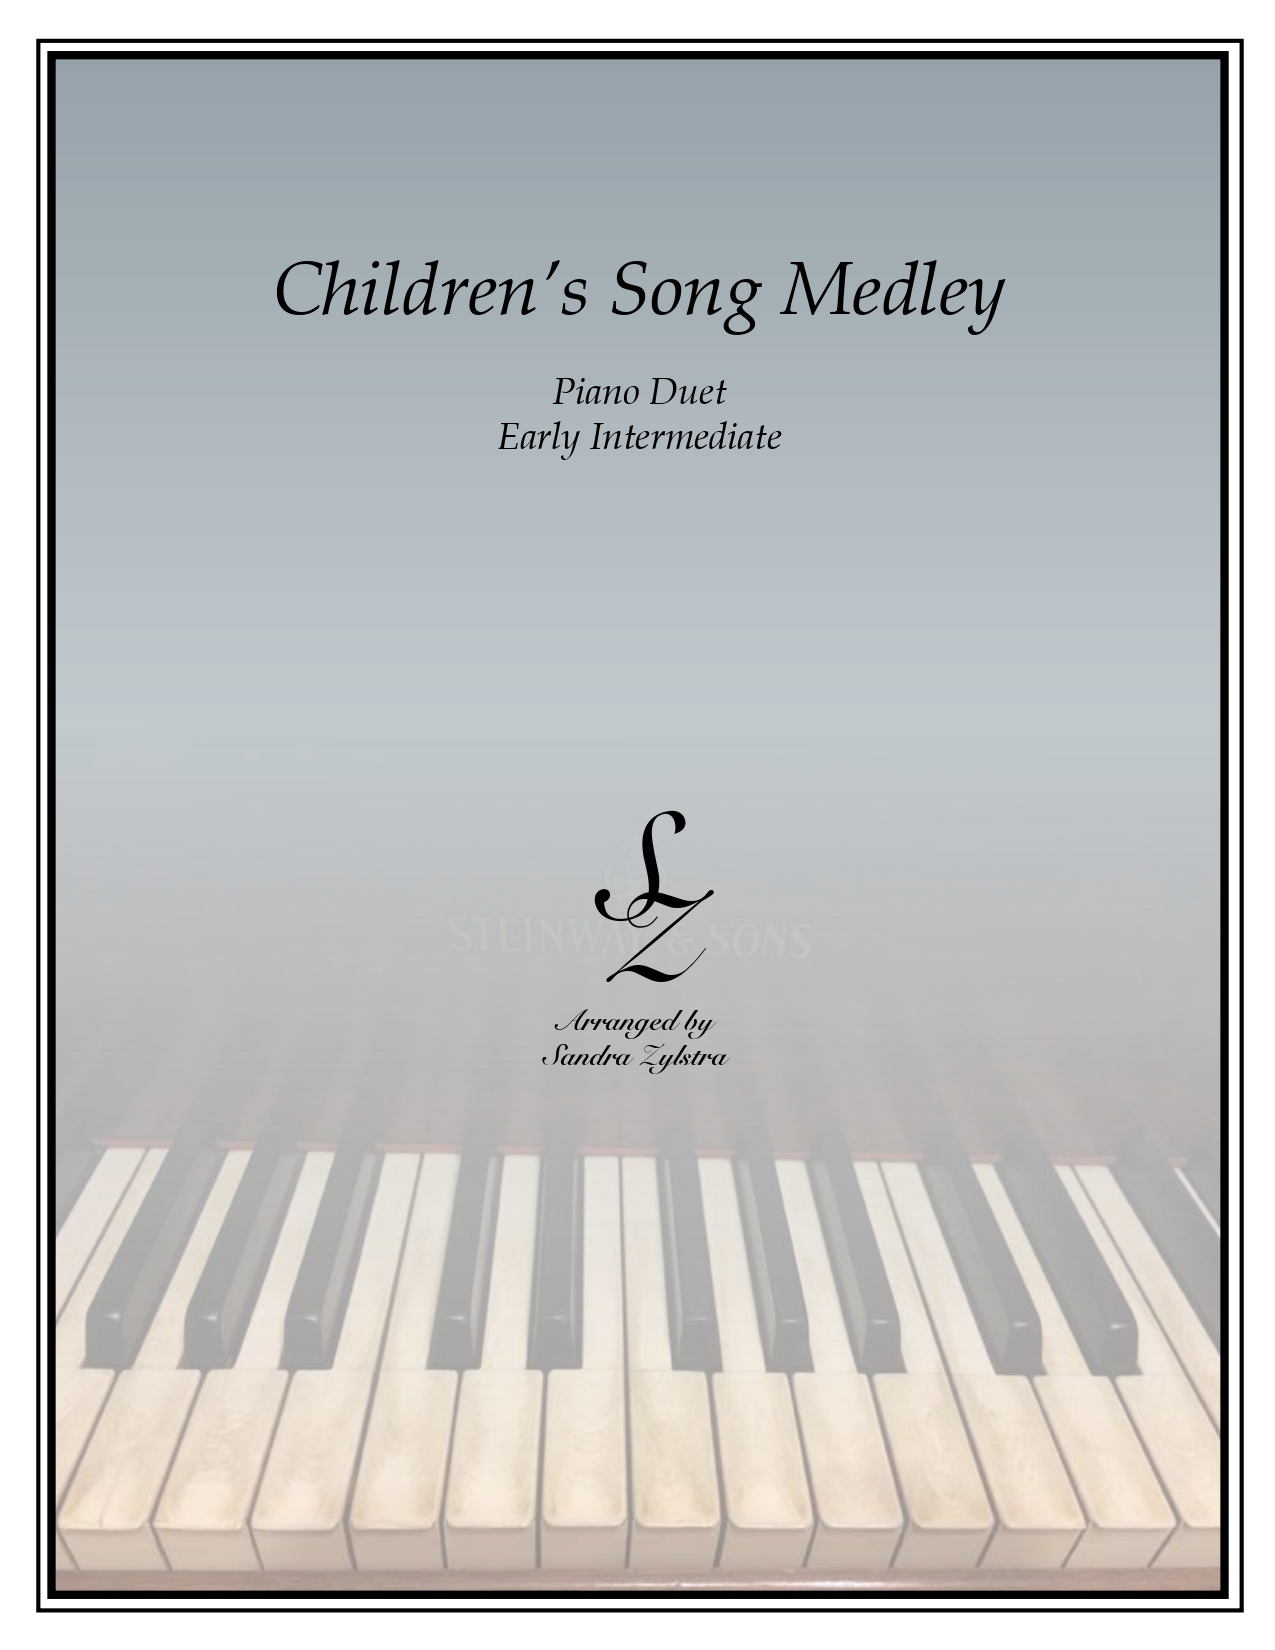 Childrens Song Medley early intermediate duet parts cover page 00011